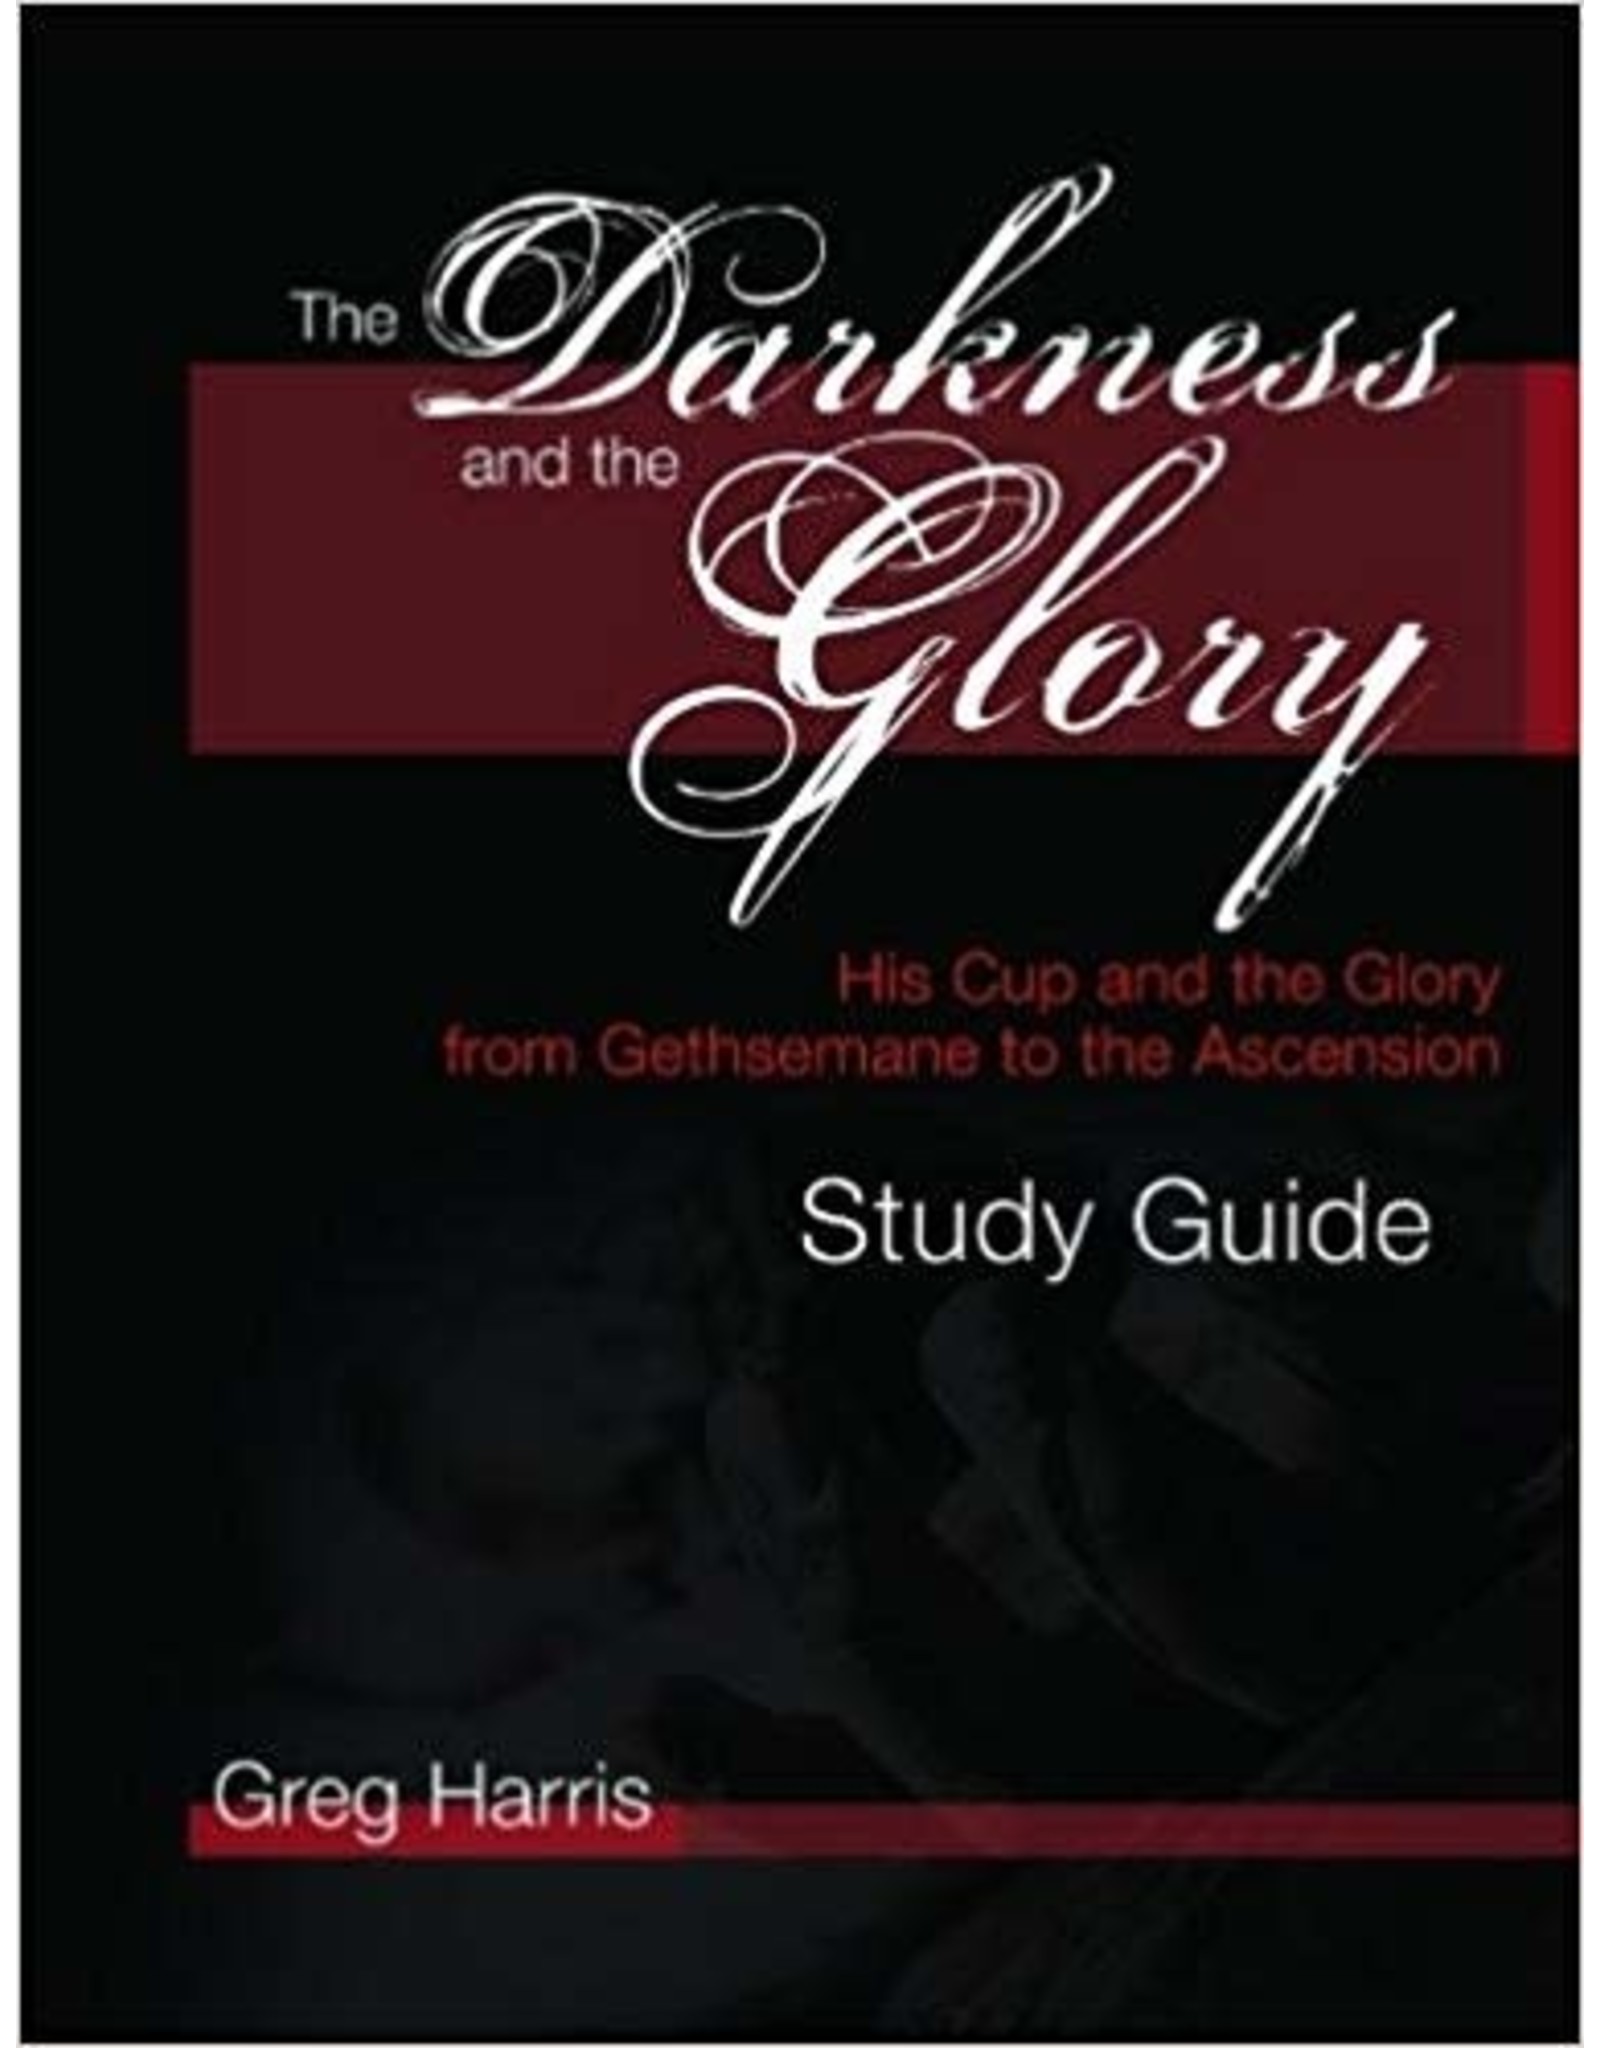 Greg Harris The Darkness and The Glory; Study Guide